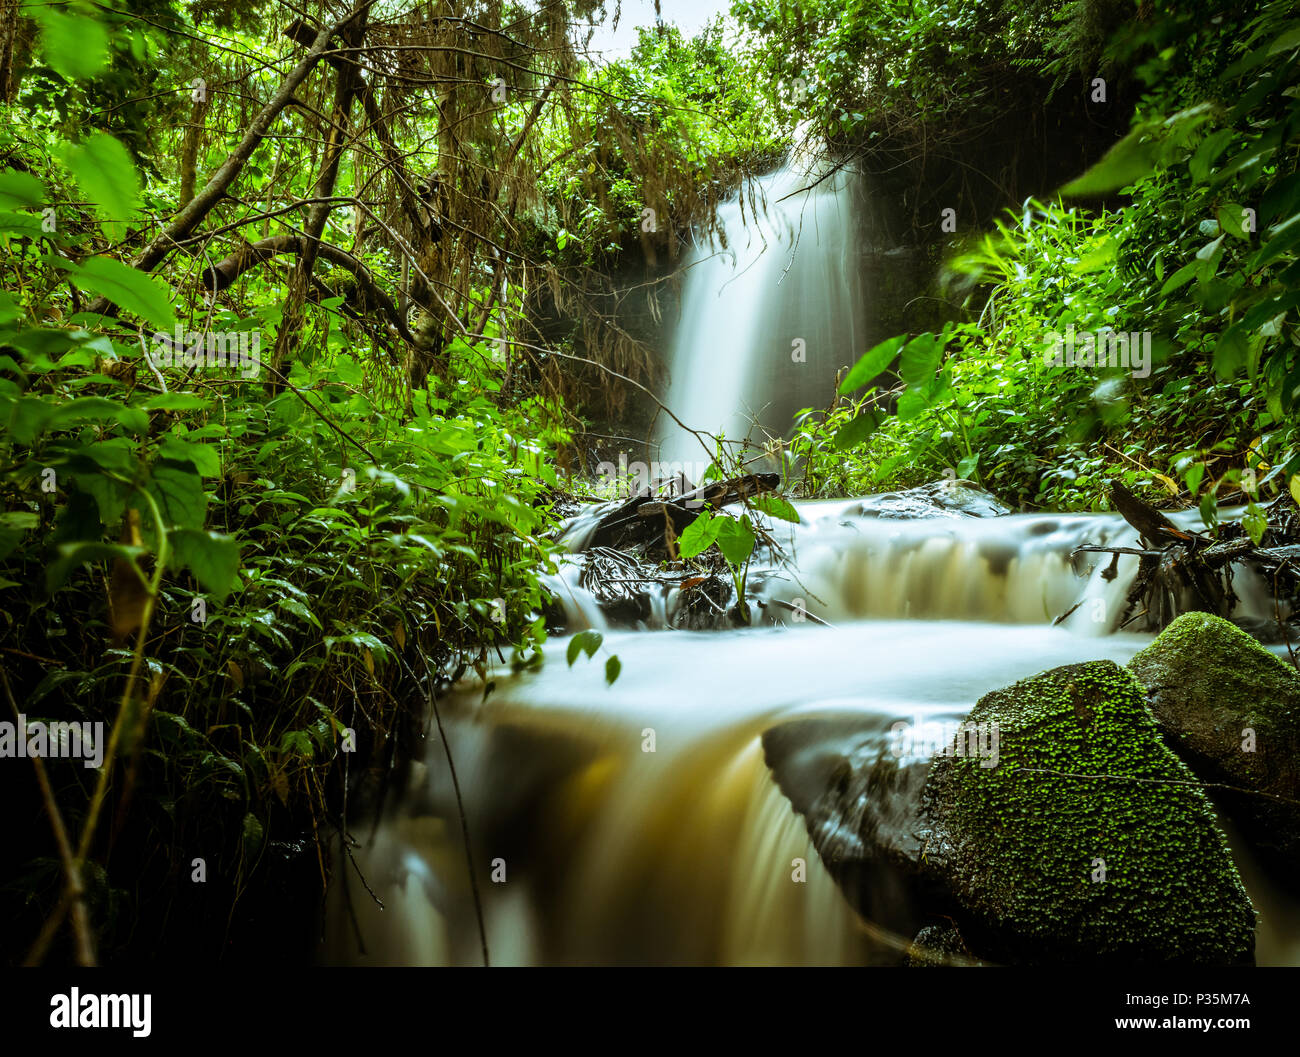 A silky,smooth river winding down the stream. Stock Photo